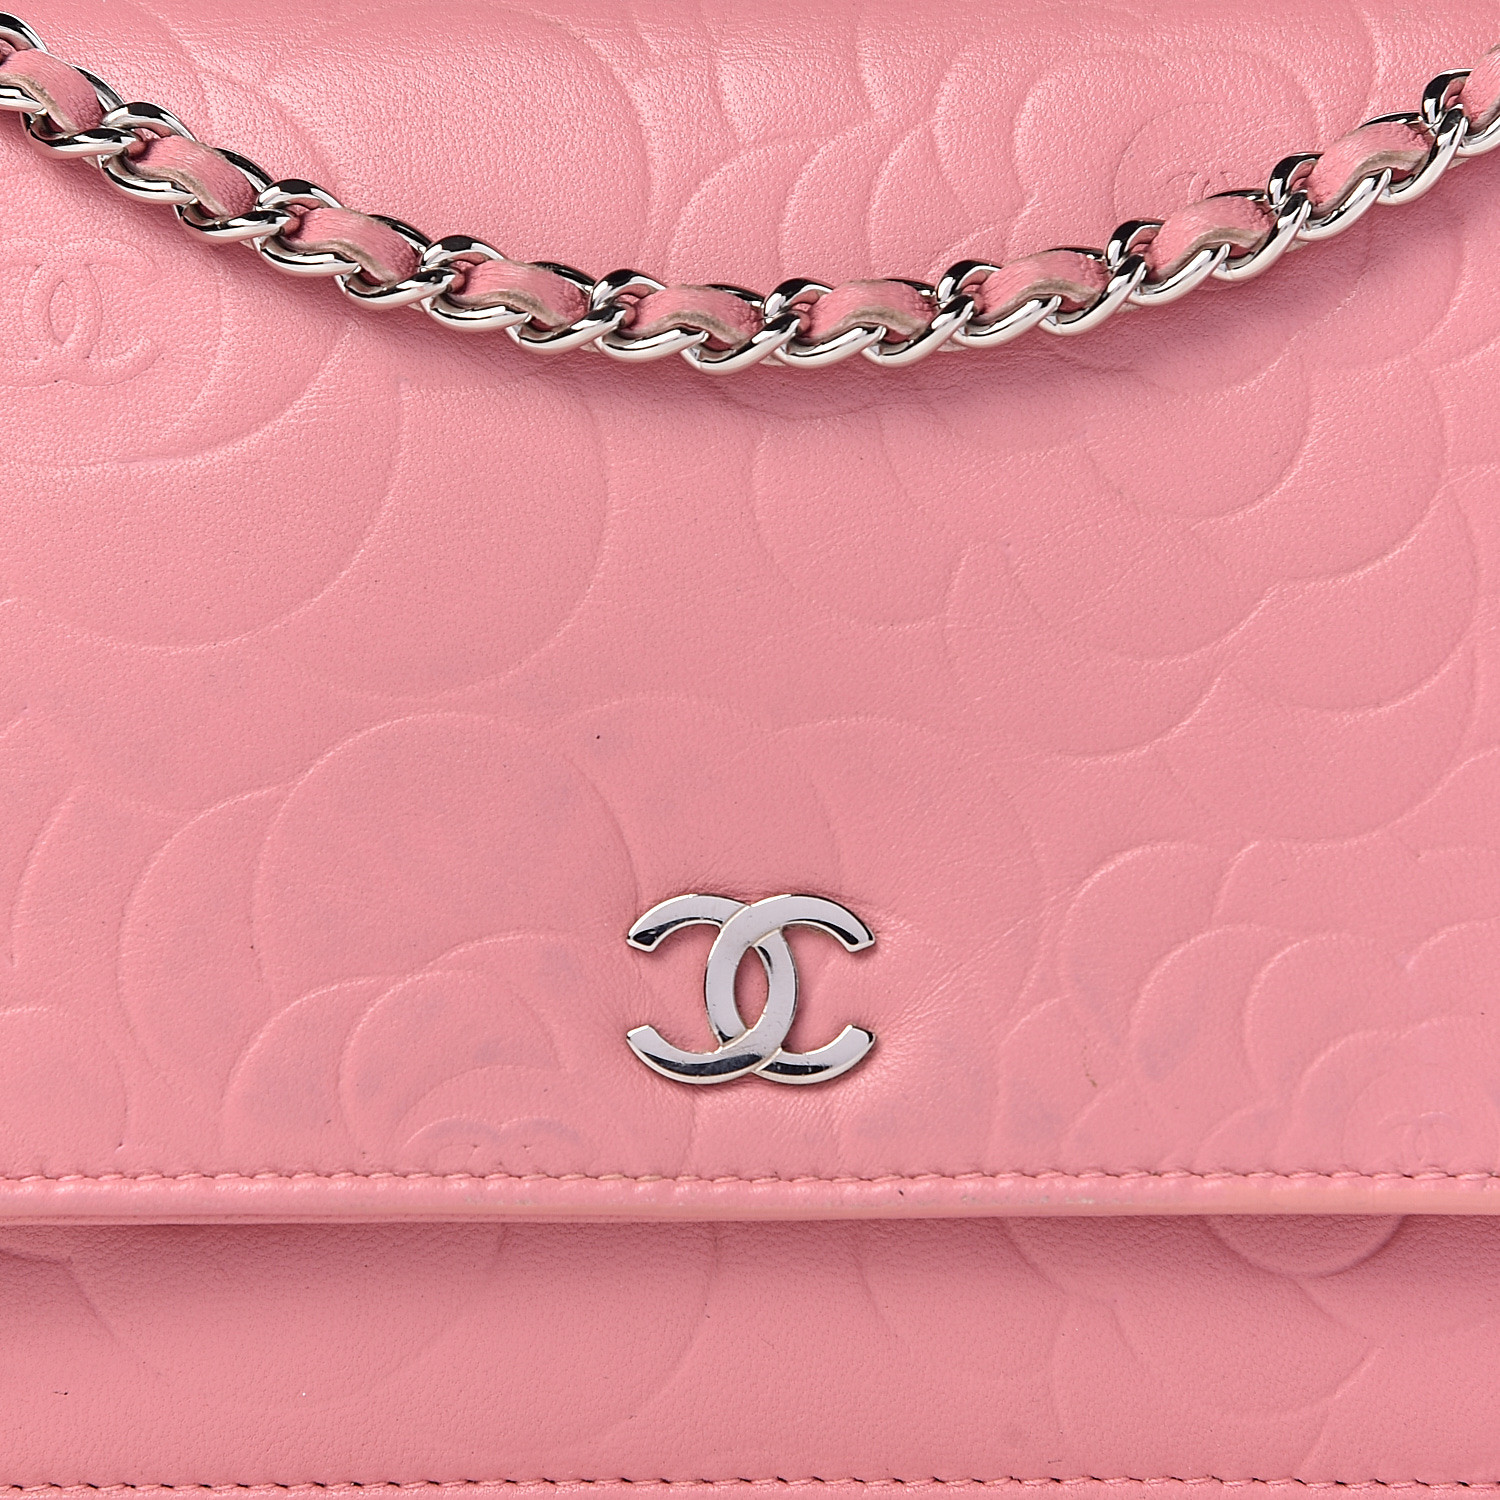 CHANEL Lambskin Camellia Embossed Wallet On Chain WOC Pink 493276